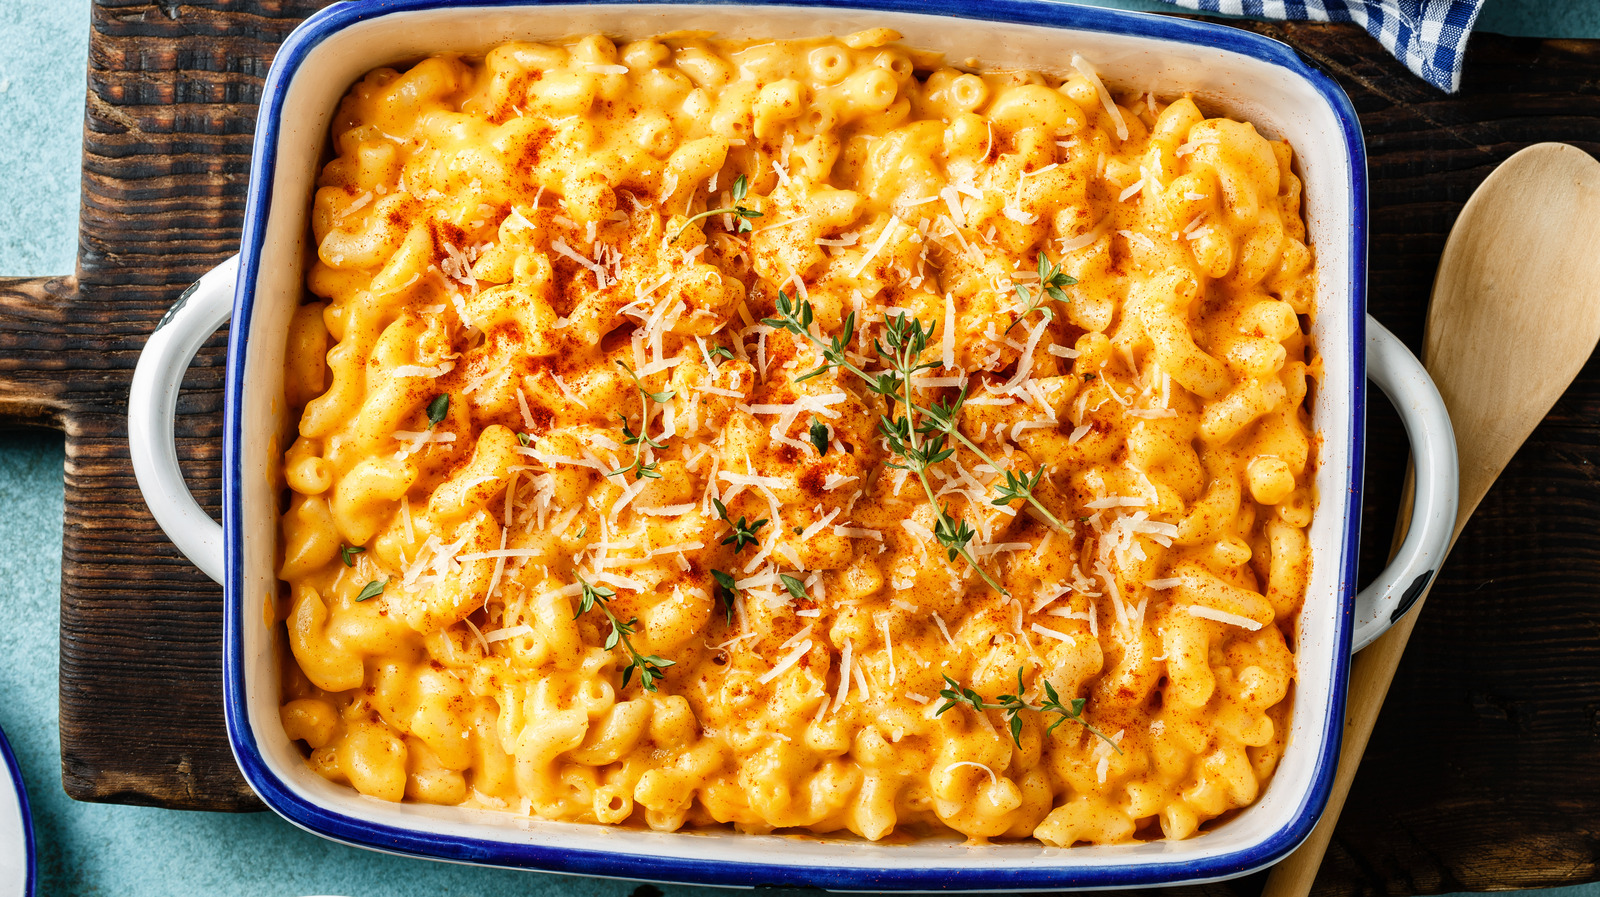 The Internet Is Losing It Over This Raisin Mac And Cheese